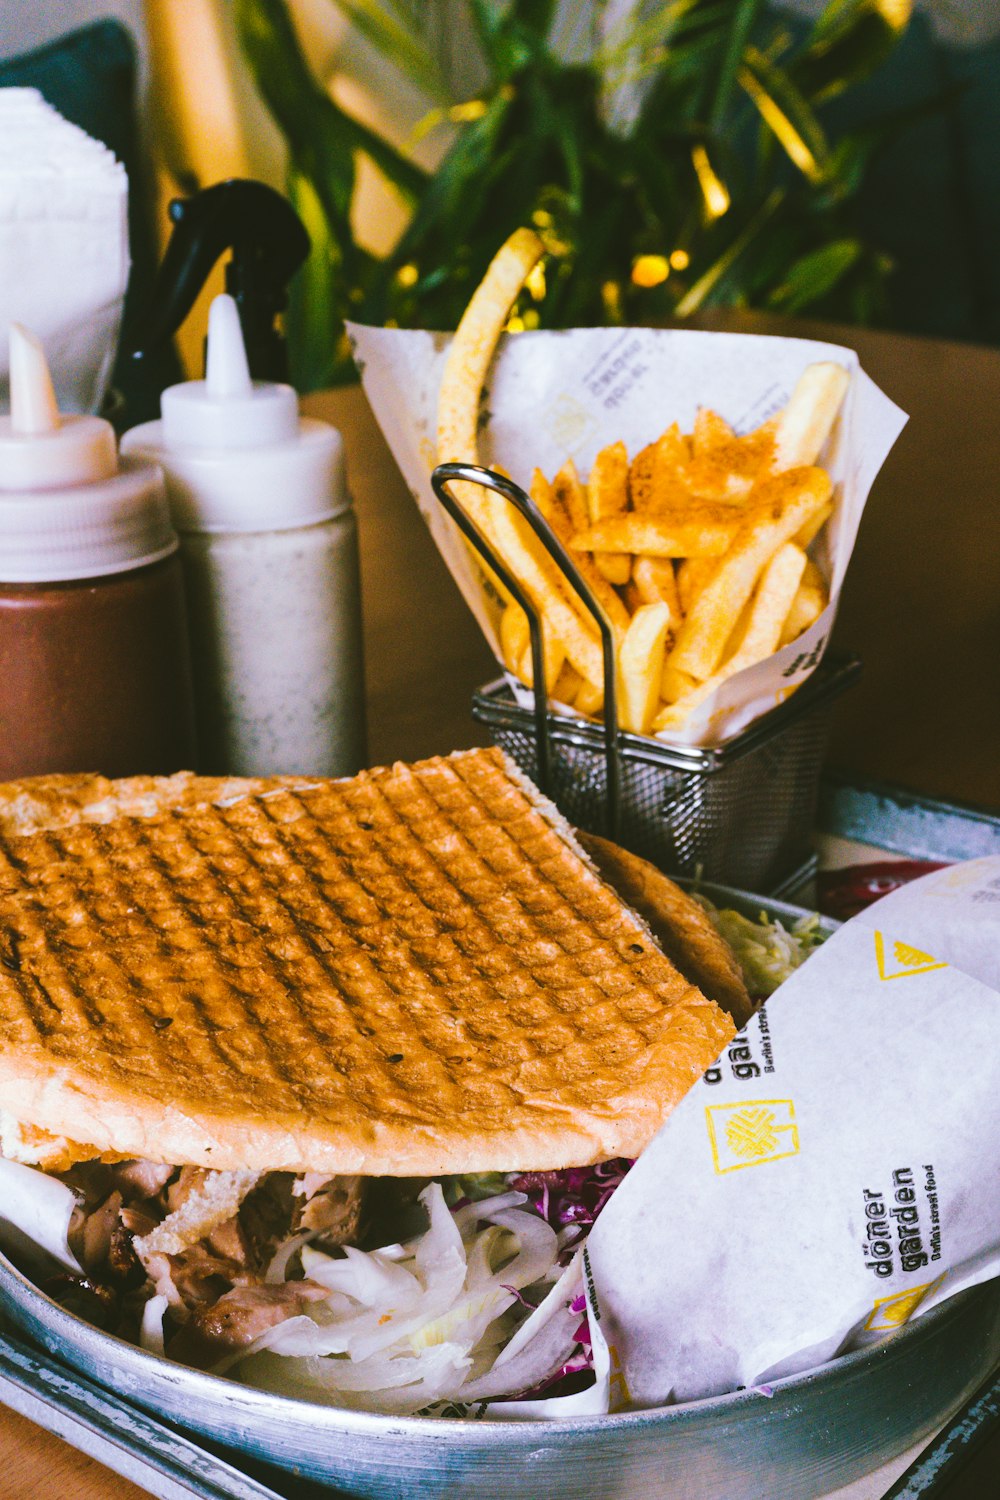 a waffle sandwich and french fries on a tray